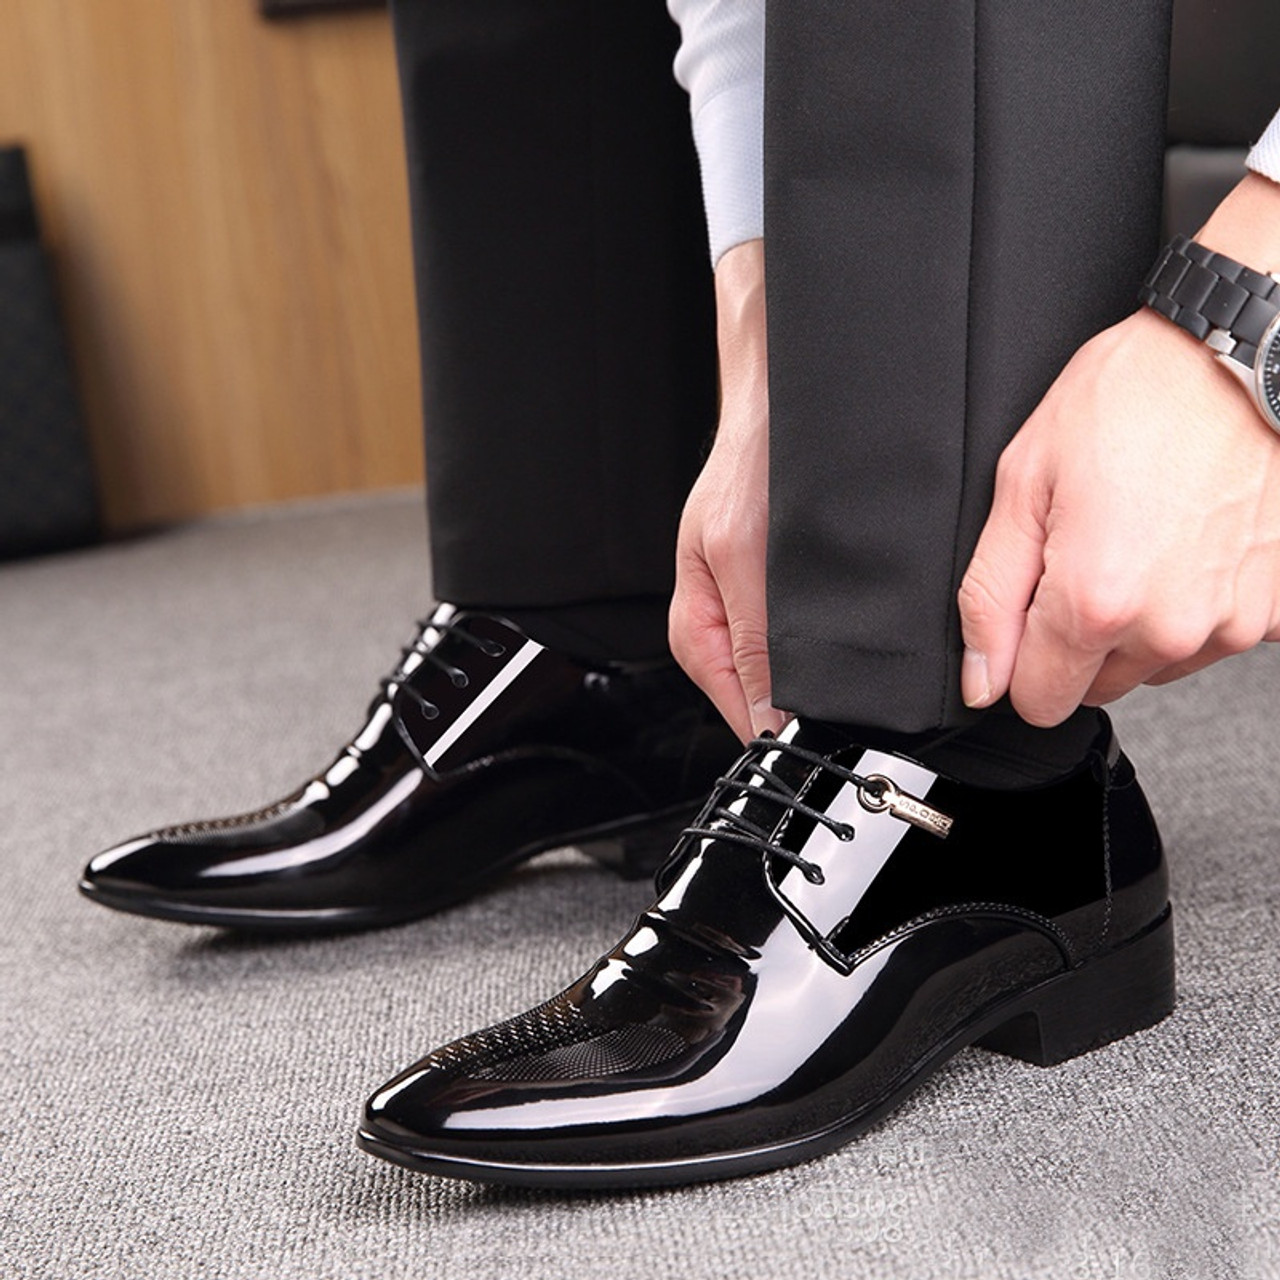 dress shoes business casual